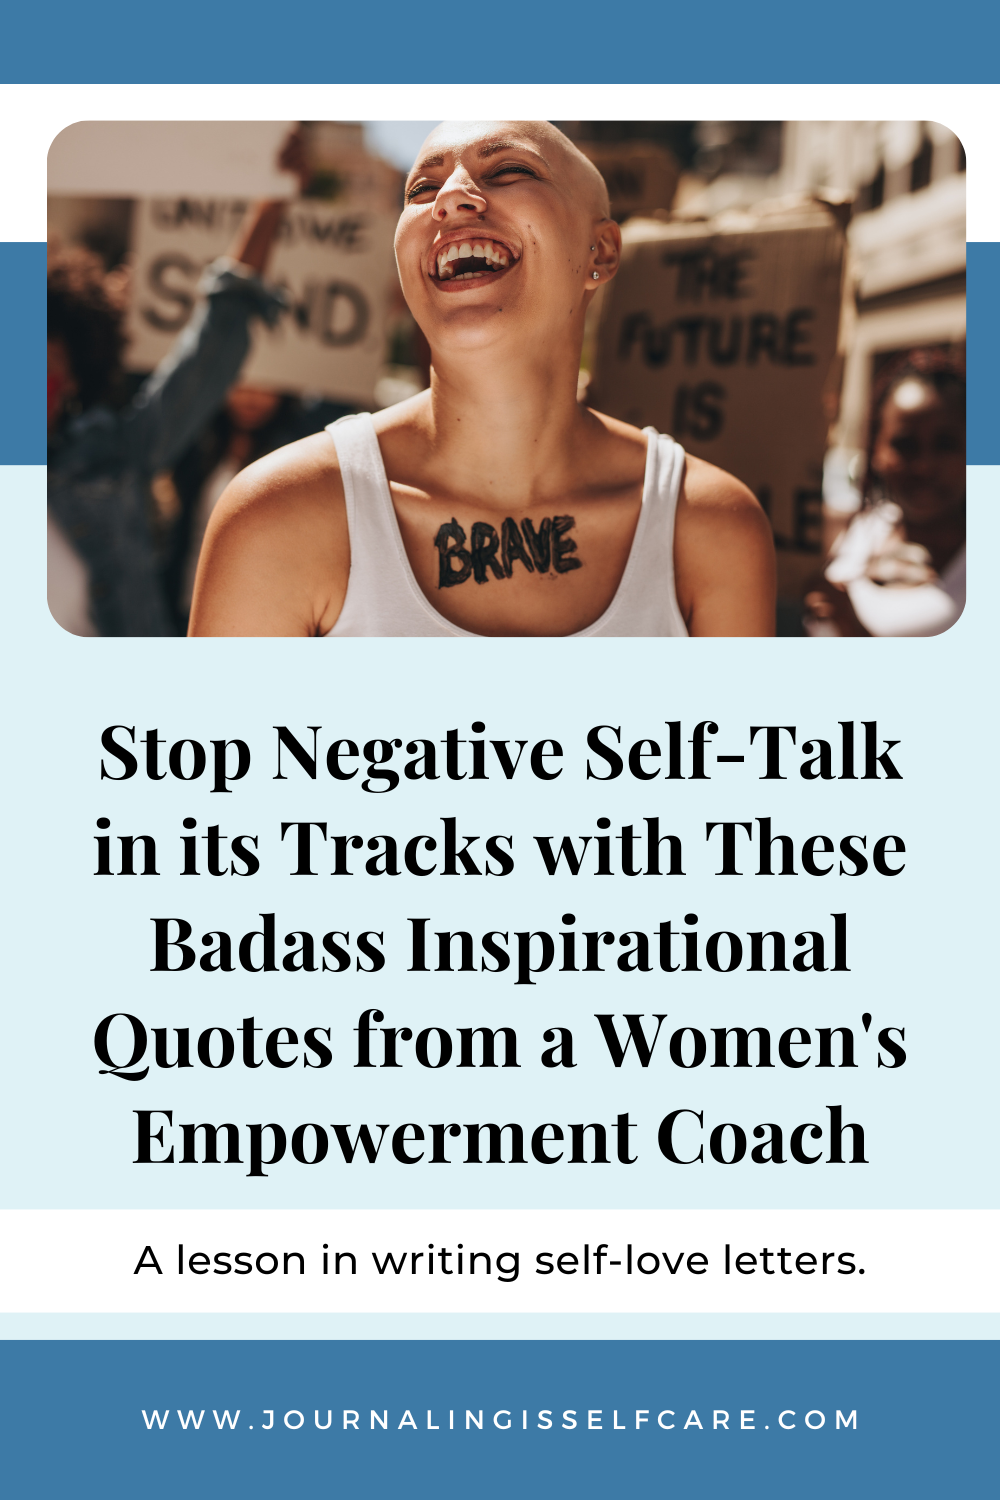 Stop Negative Self-Talk in its Tracks with These Badass Inspirational Quotes from a Women's Empowerment Coach